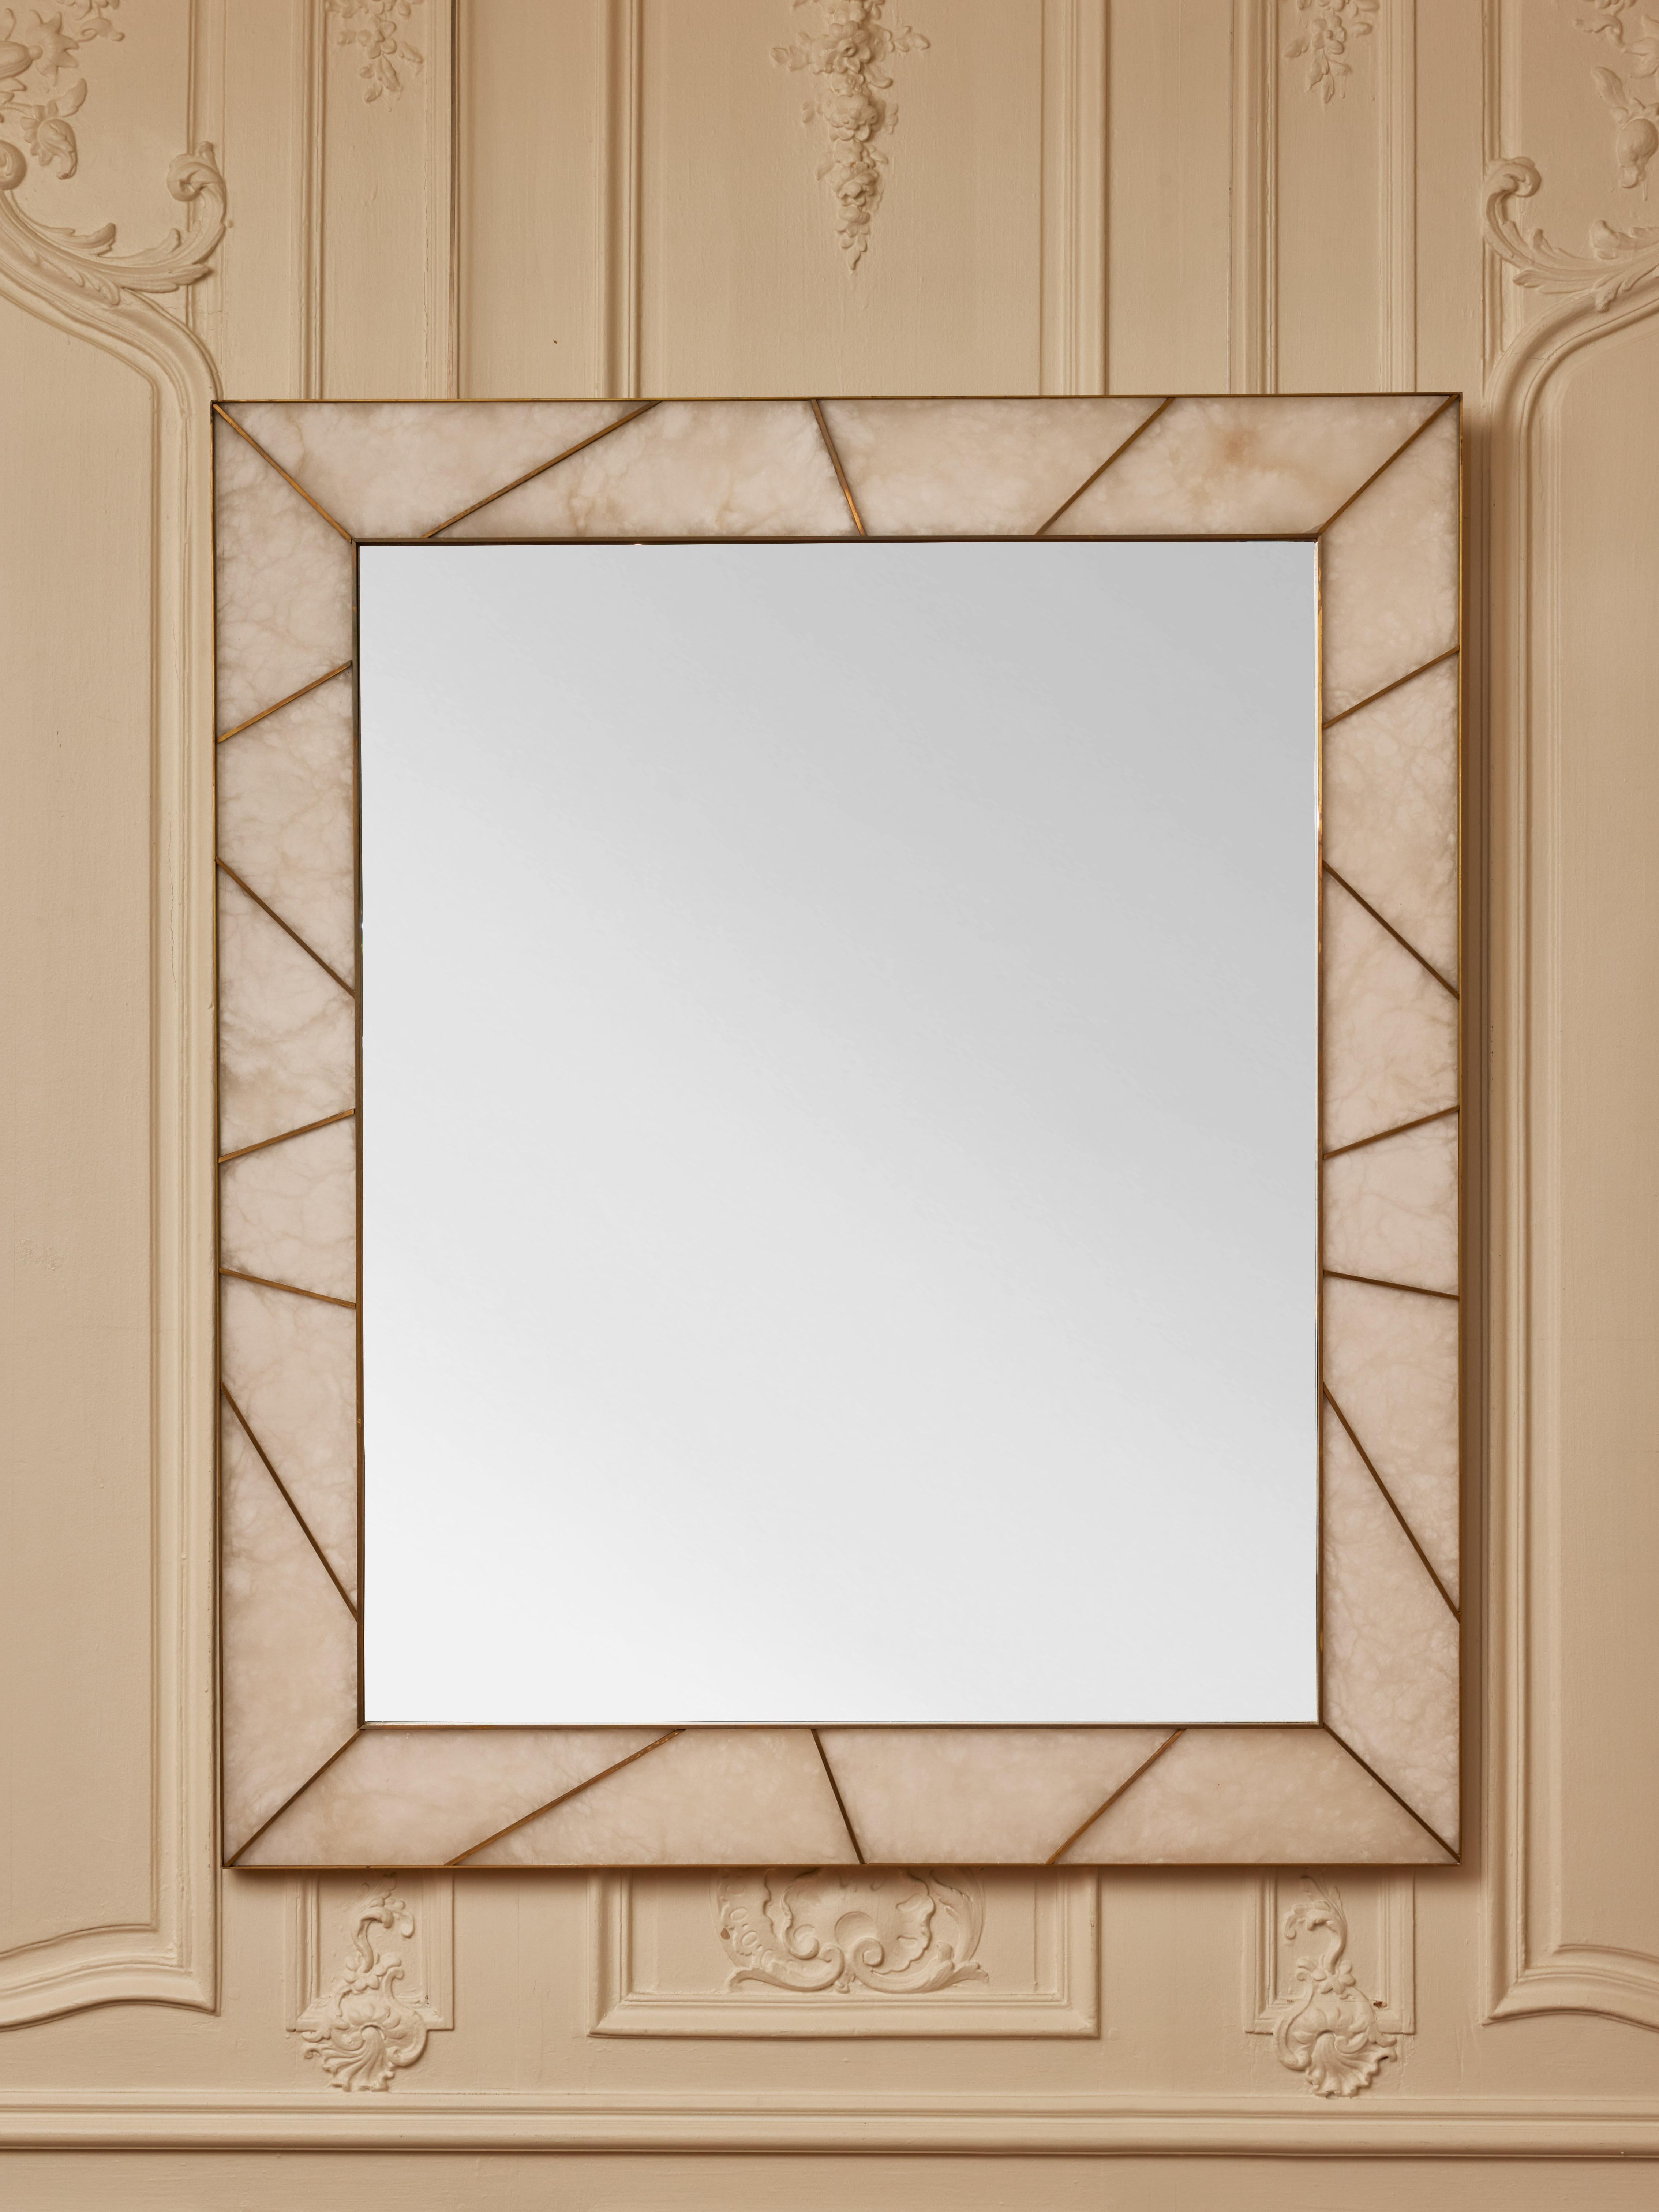 Important mirror framed with alabaster and brass inlays.
Creation by Studio Glustin.